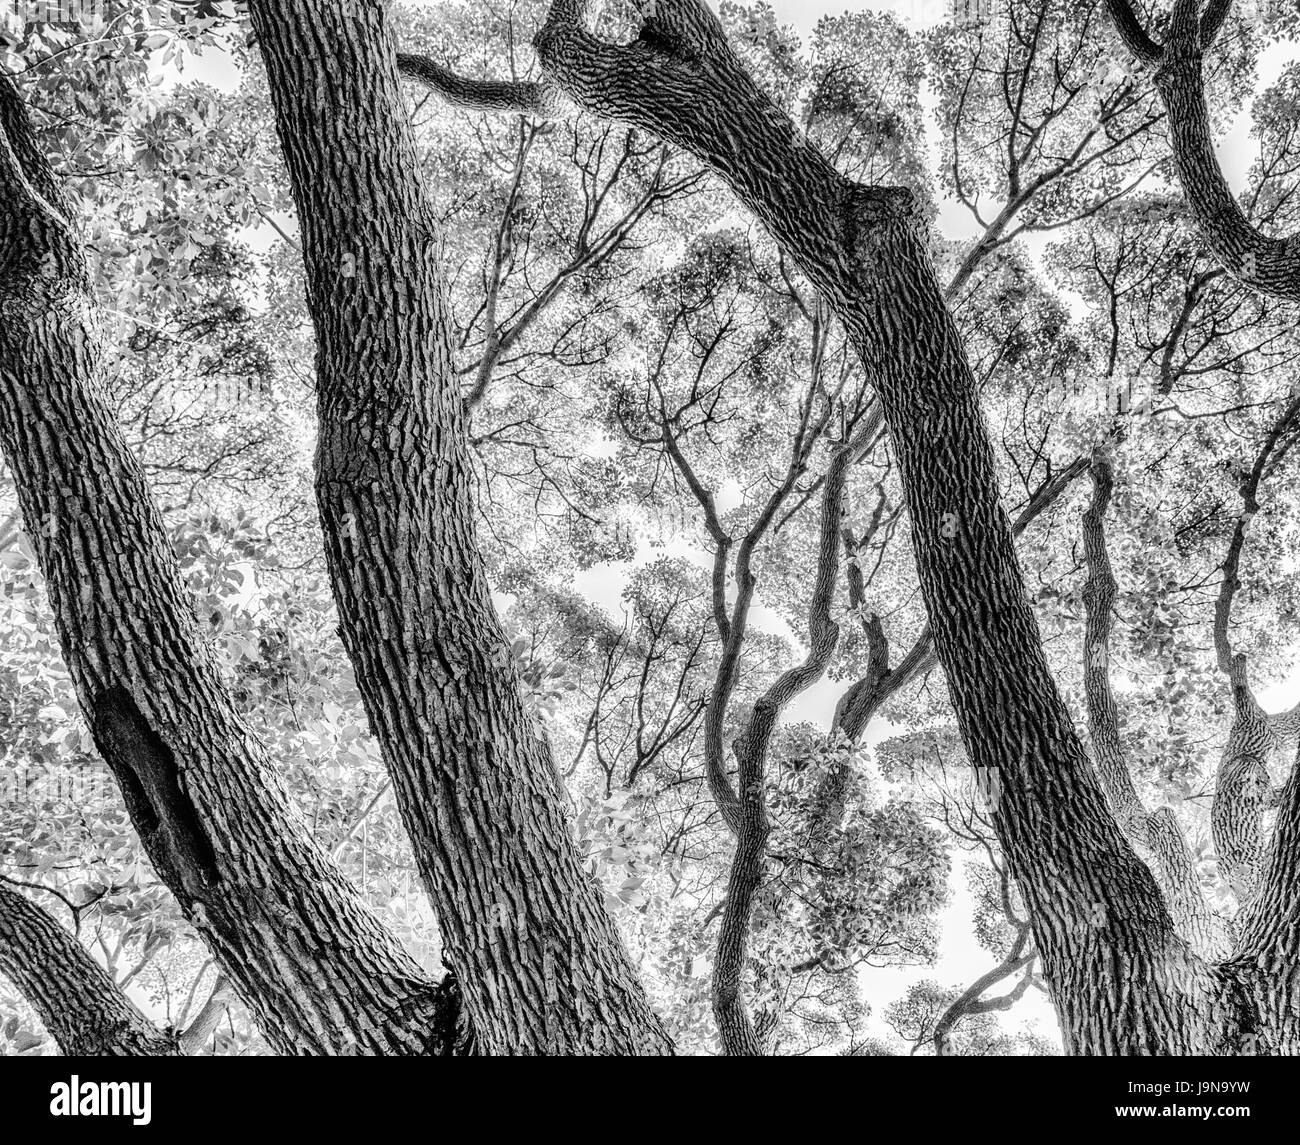 Monochrome graphical black and white abstract fine art image of trees taken in South Africa Stock Photo